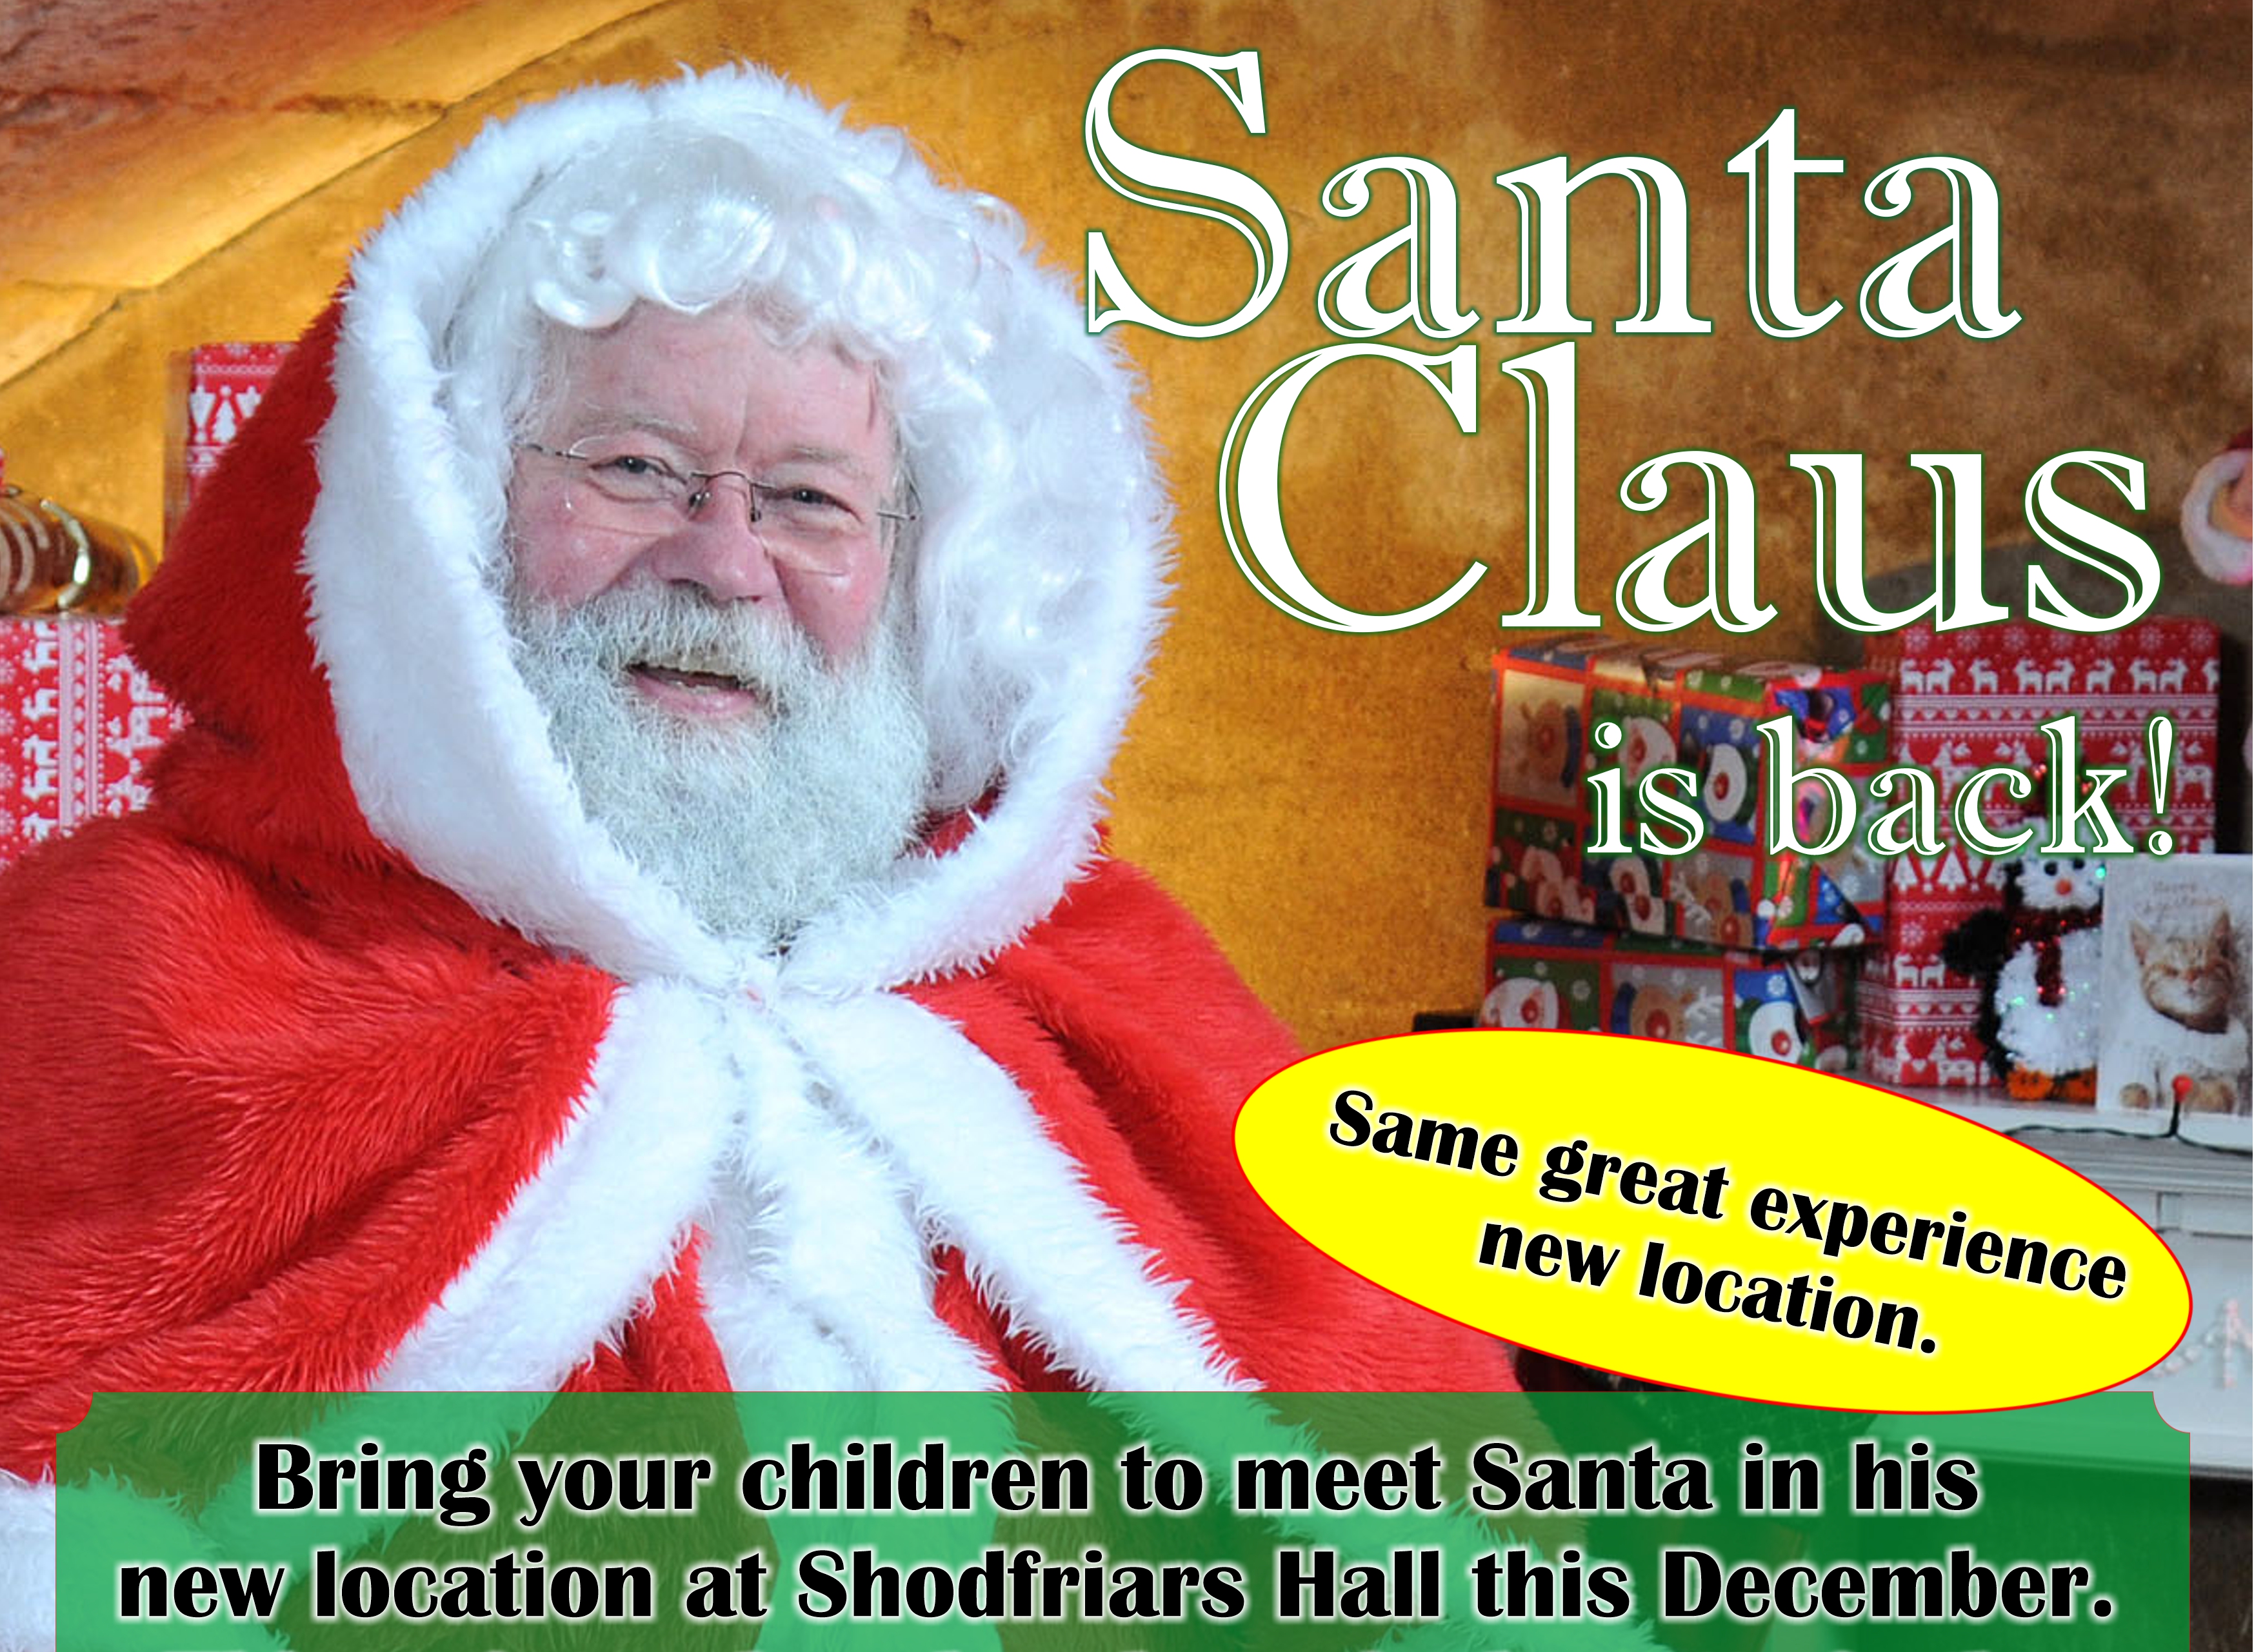 Santa Claus is back this December 2019